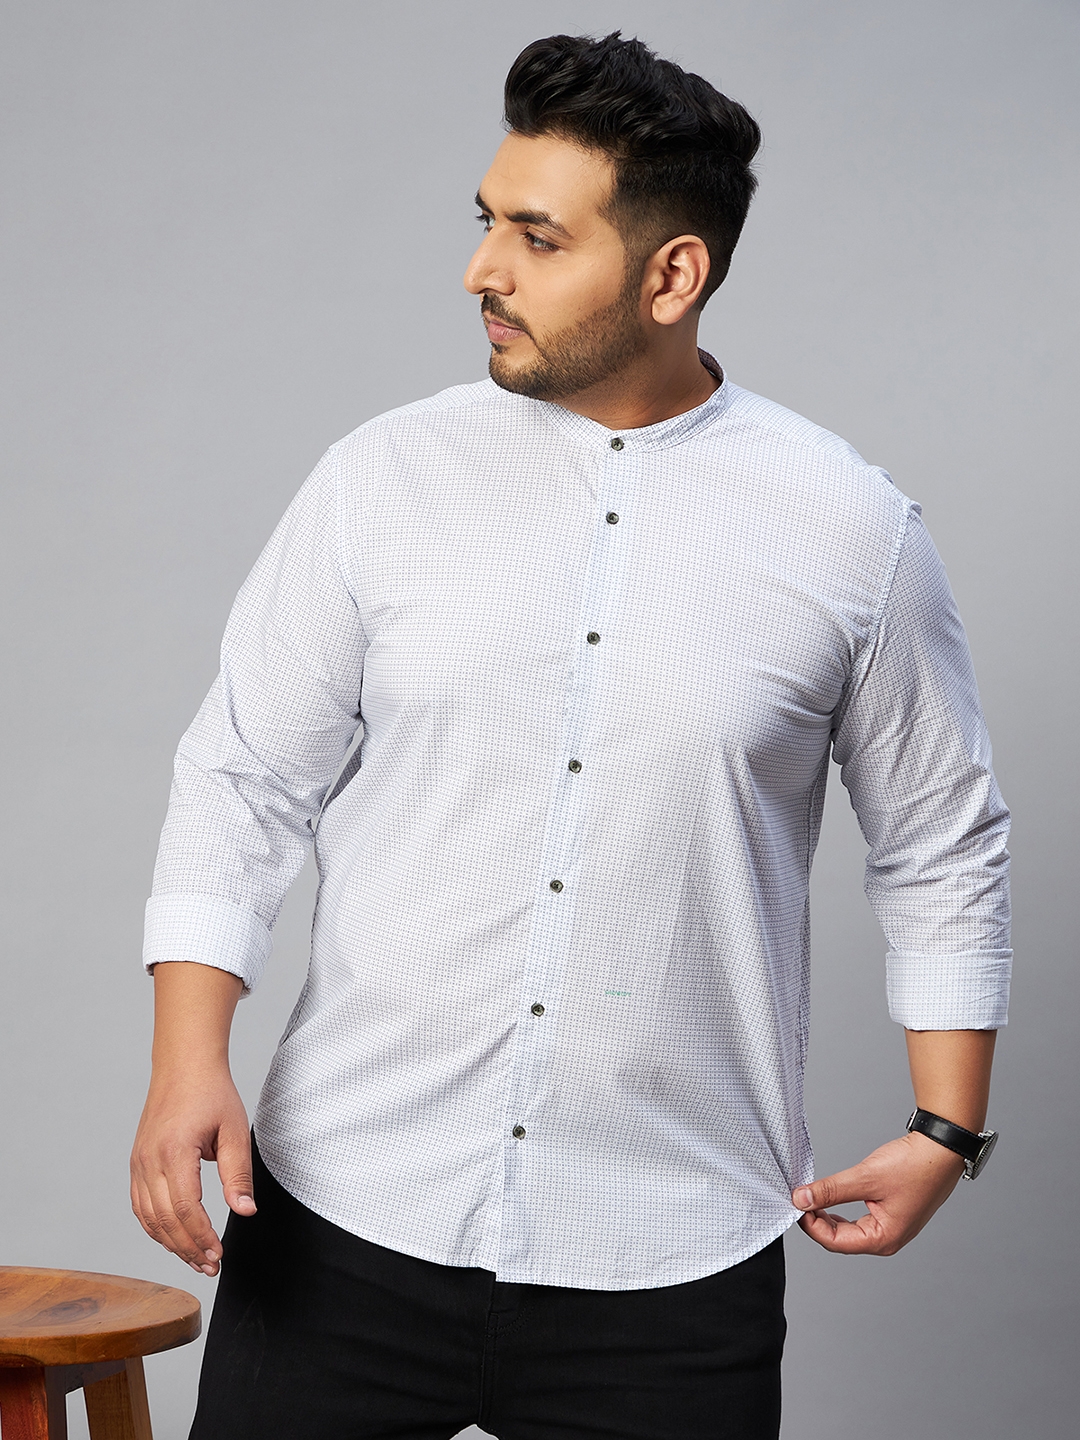 SHOWOFF Plus Men's Comfort Fit Cotton White Micro or Ditsy Print Shirt